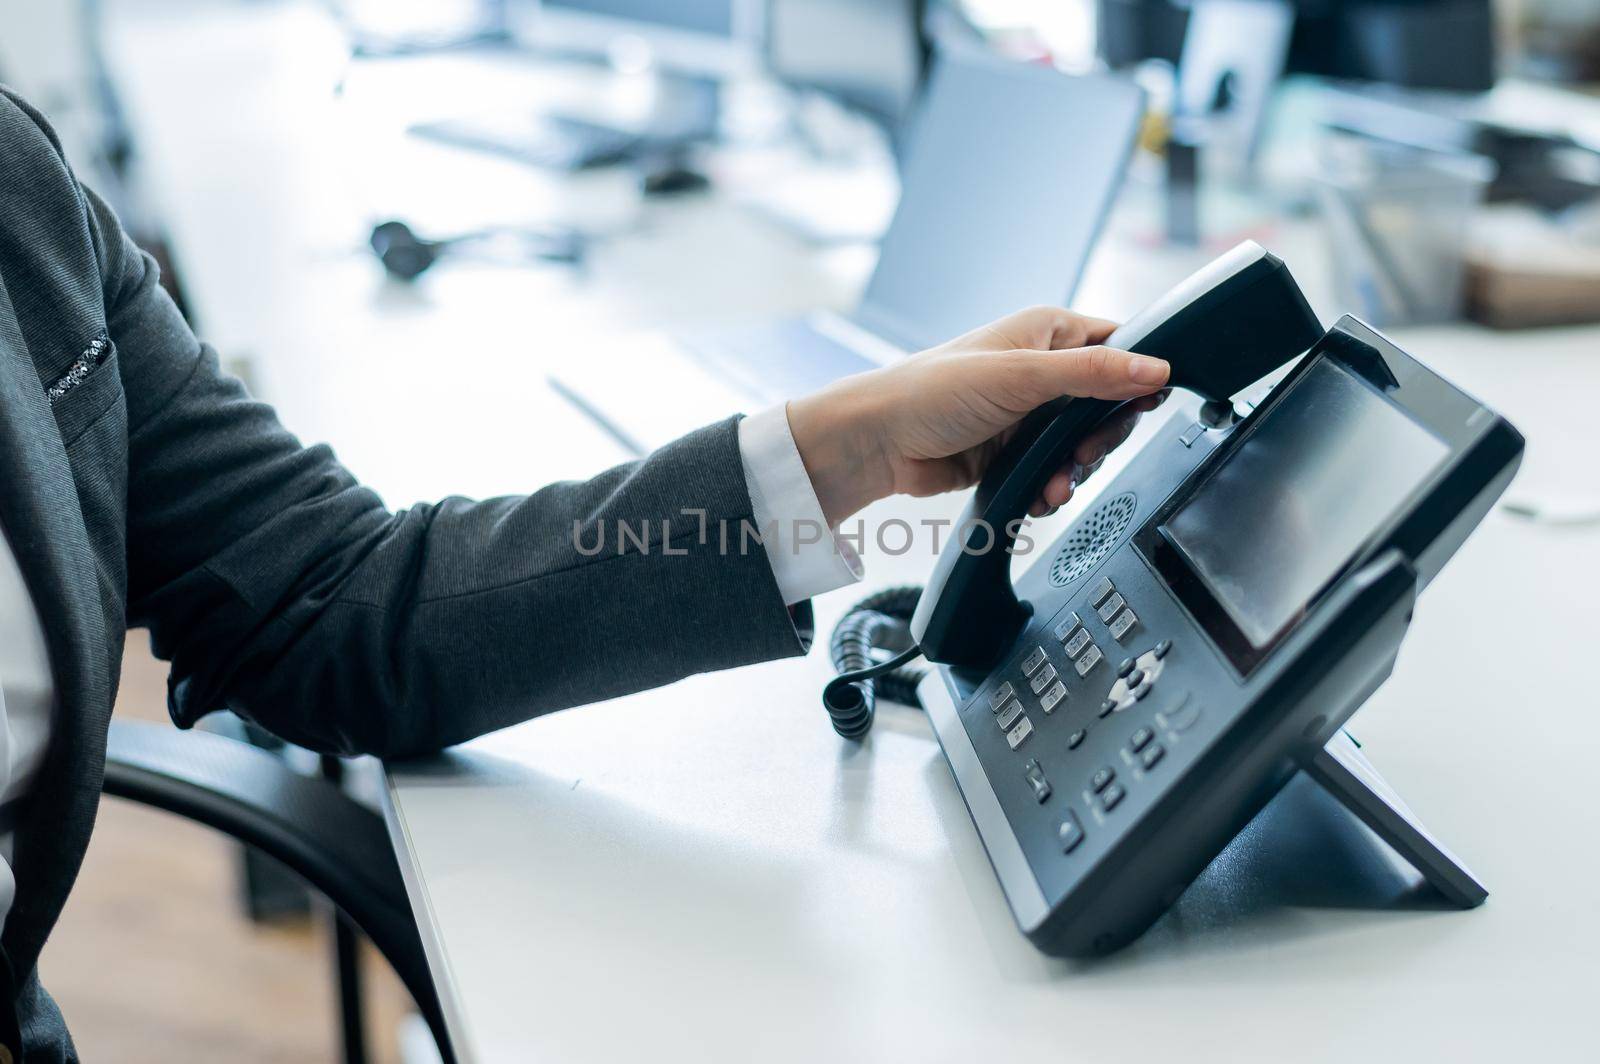 Closeup female hand on landline phone in office. Faceless woman in a suit works as a receptionist answering the phone to customer calls